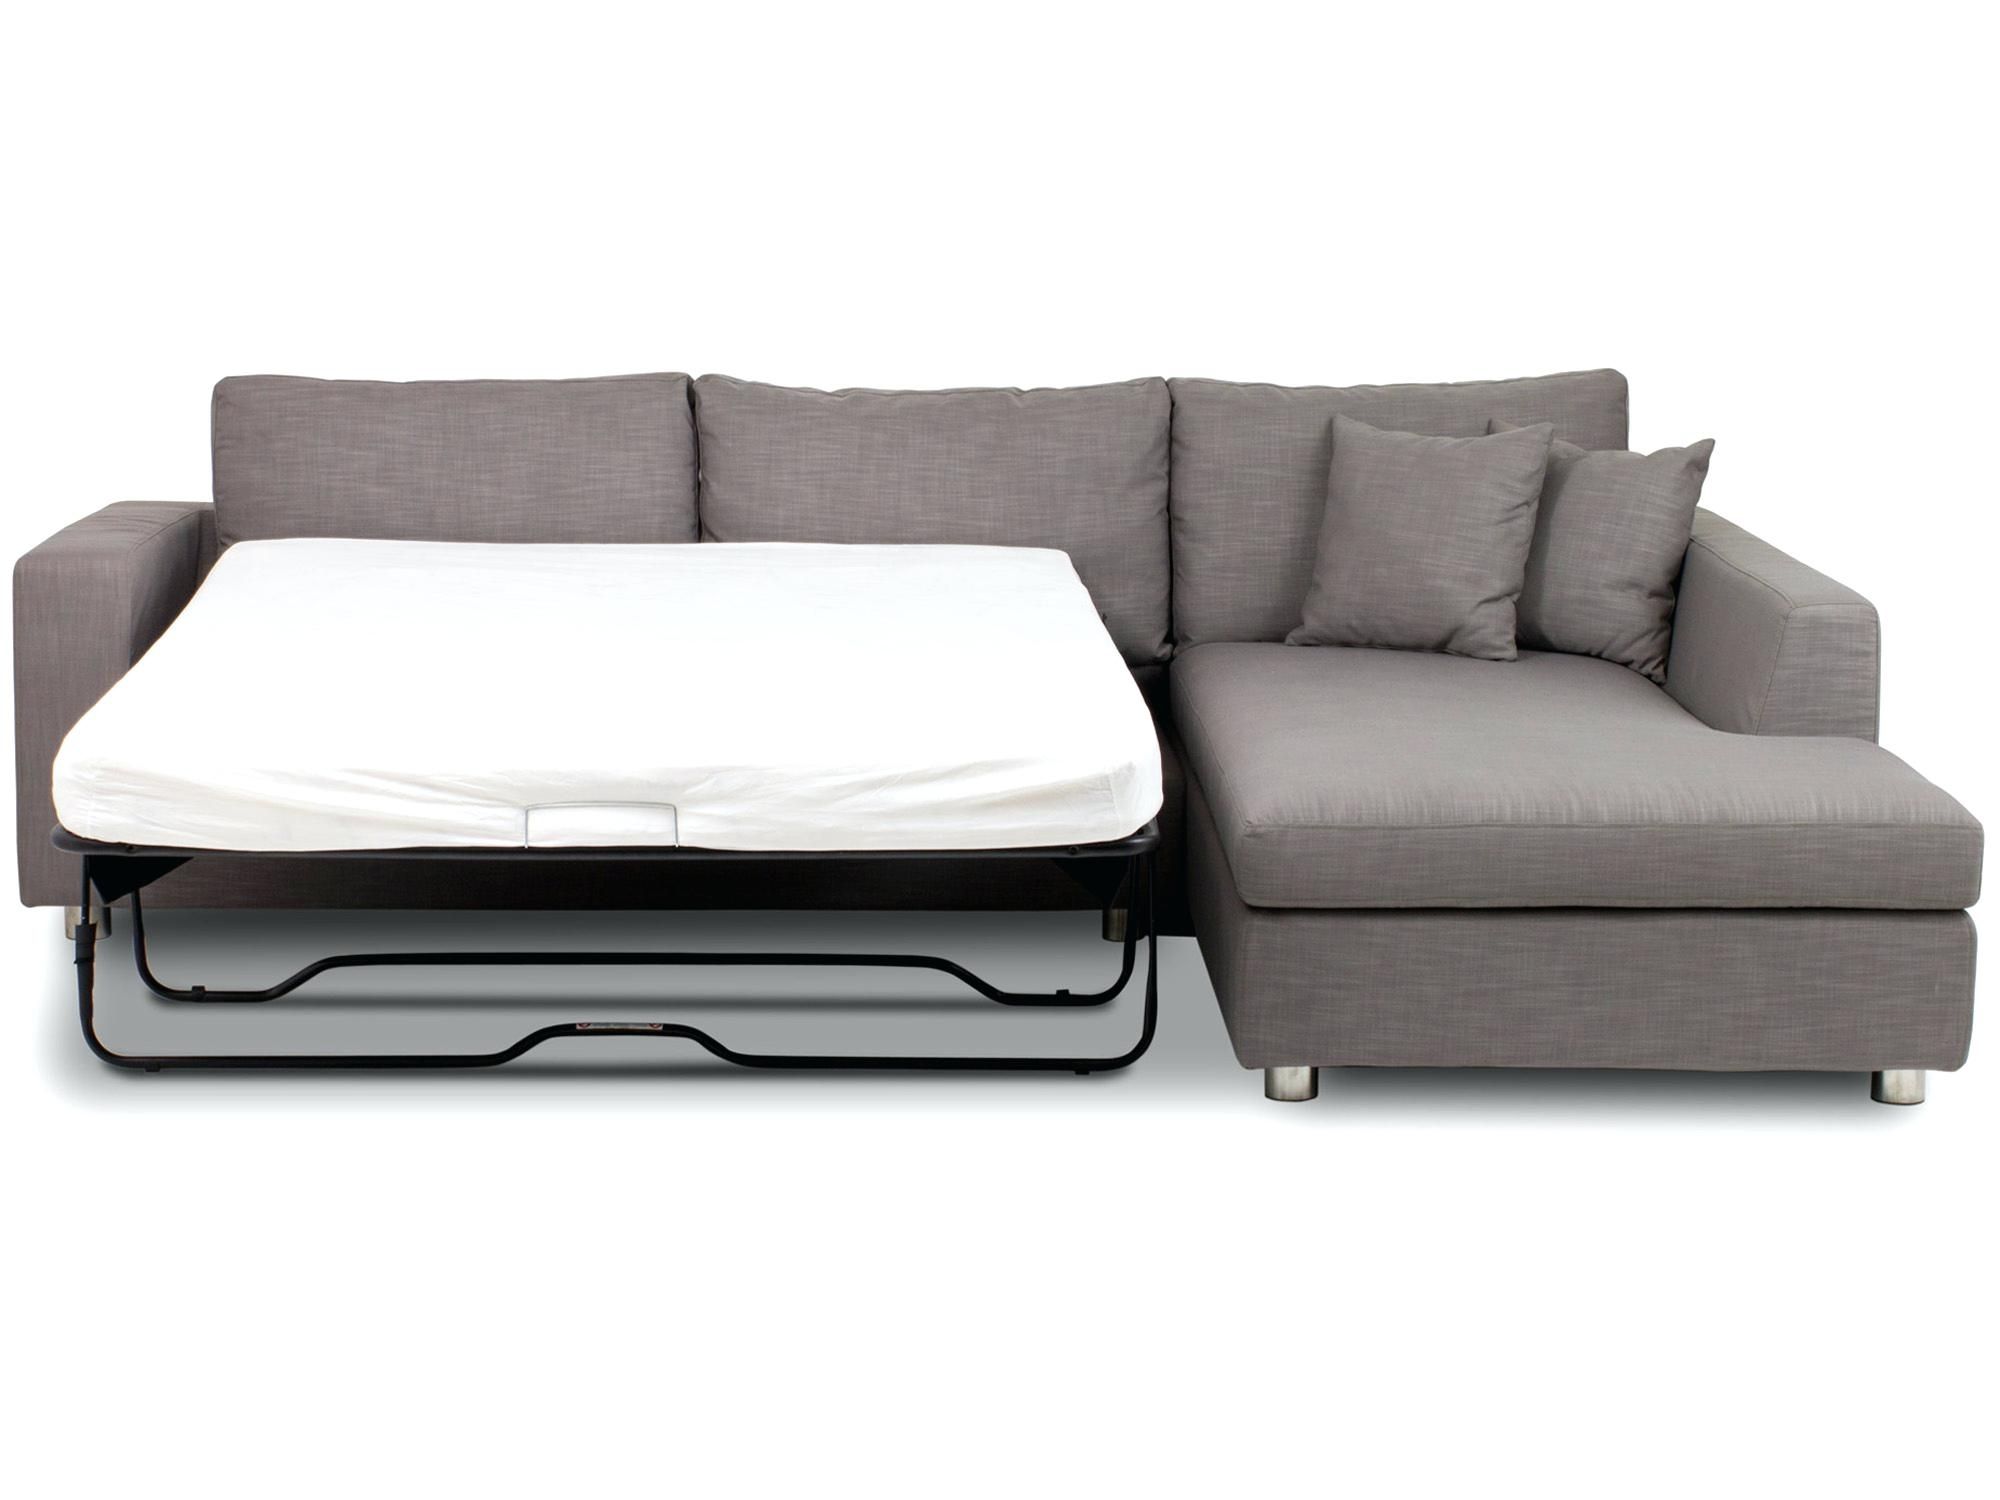 sofa bed with chaise lounge in amazon japan